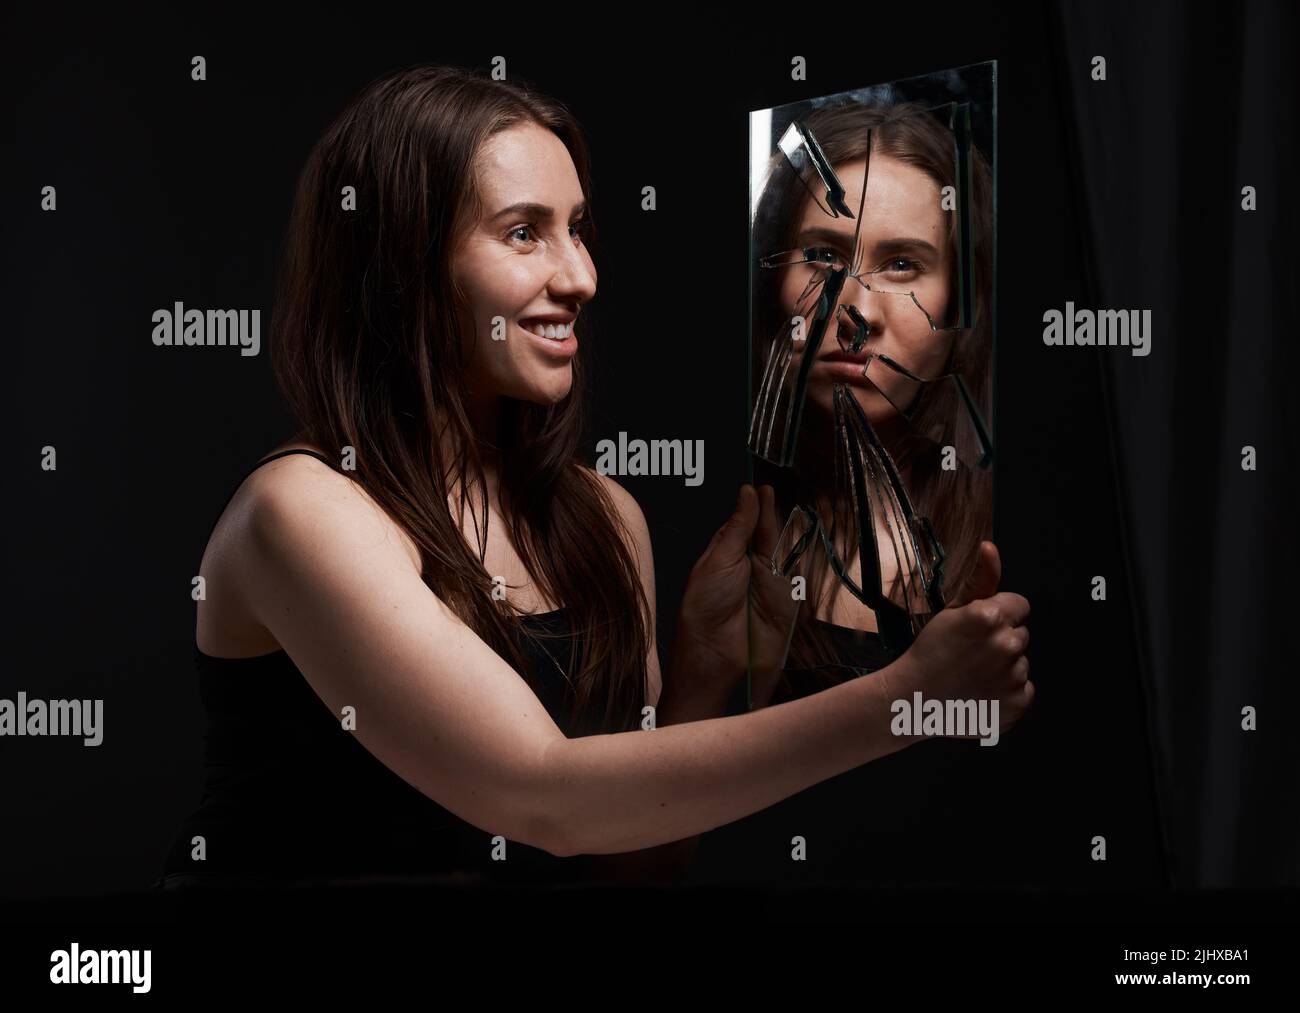 You dont know me. a creepy woman grinning at her reflection in a broken mirror. Stock Photo